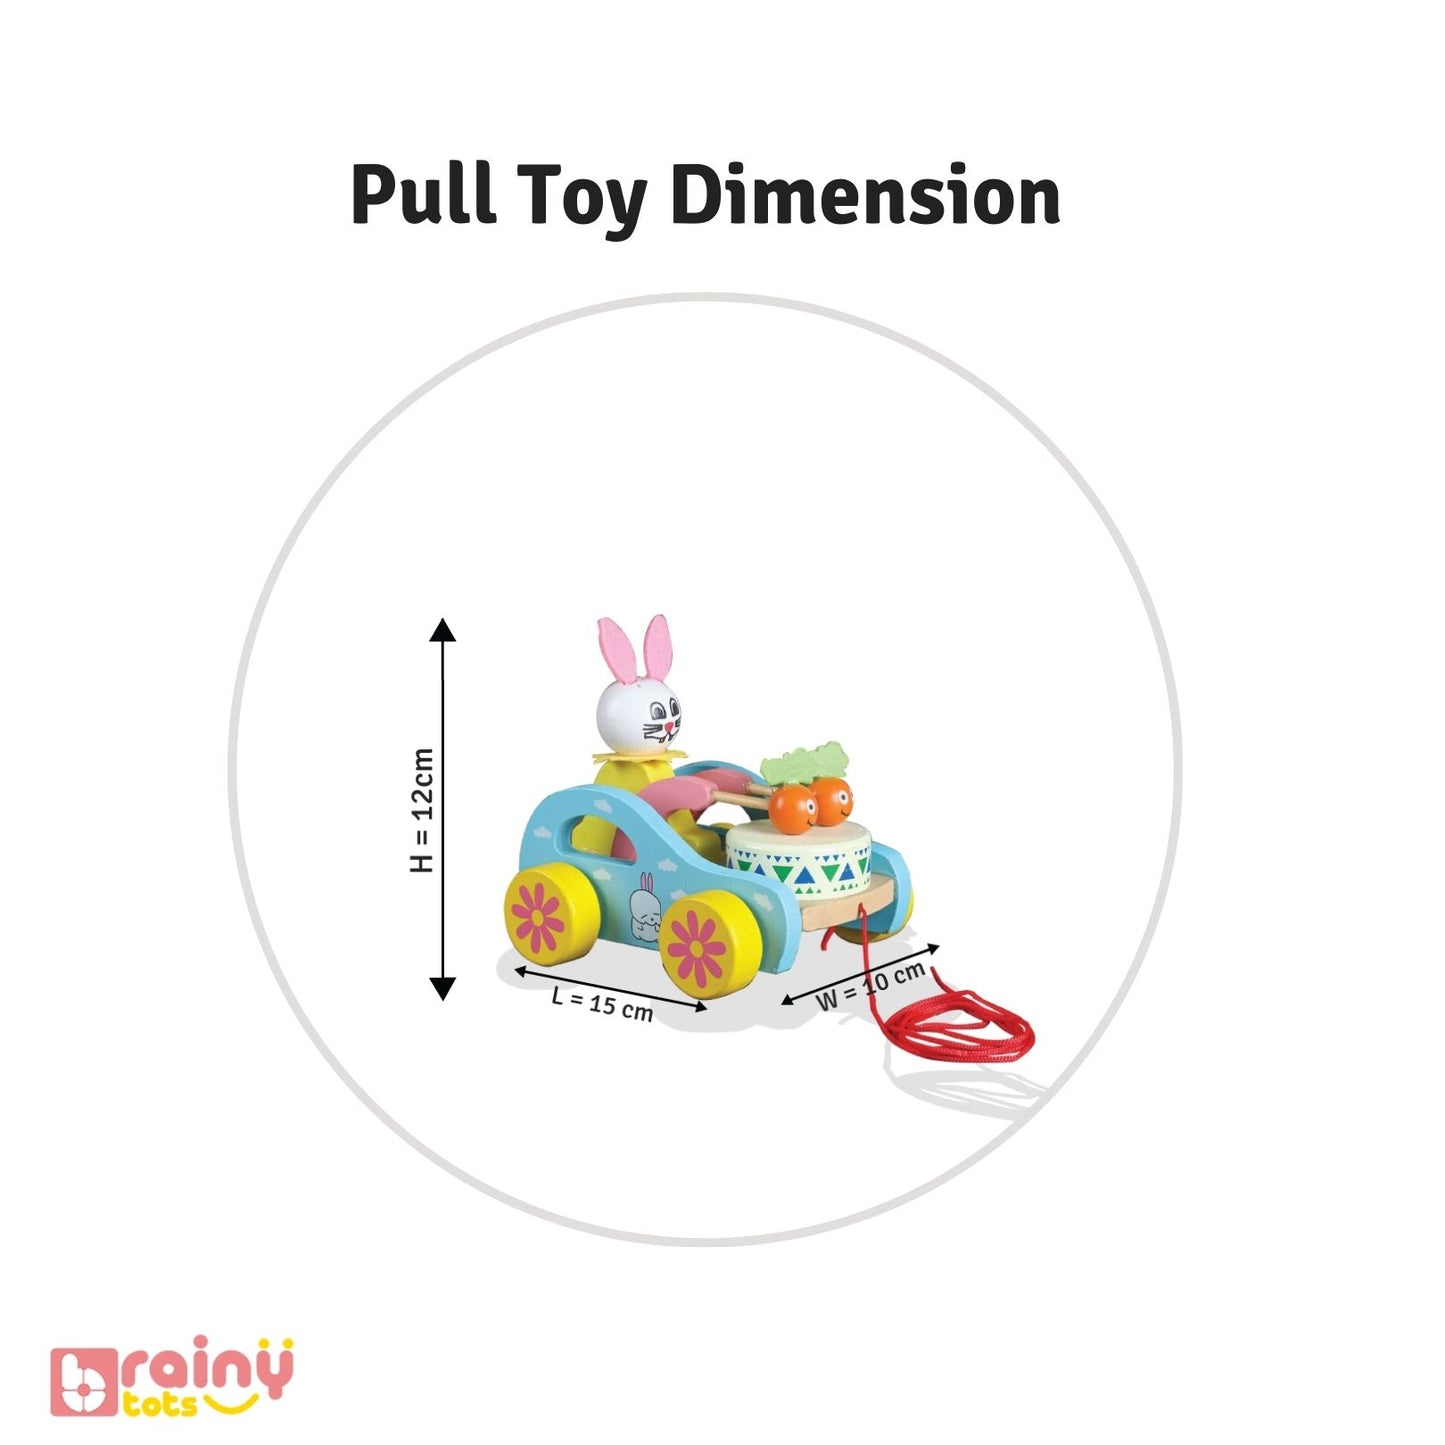 Explore the captivating allure of our 'Pull Toy Dimension' image, showcasing timeless nostalgia and vibrant creativity. Immerse yourself in our website's delightful collection of images and products, sure to spark joy and inspire imagination.